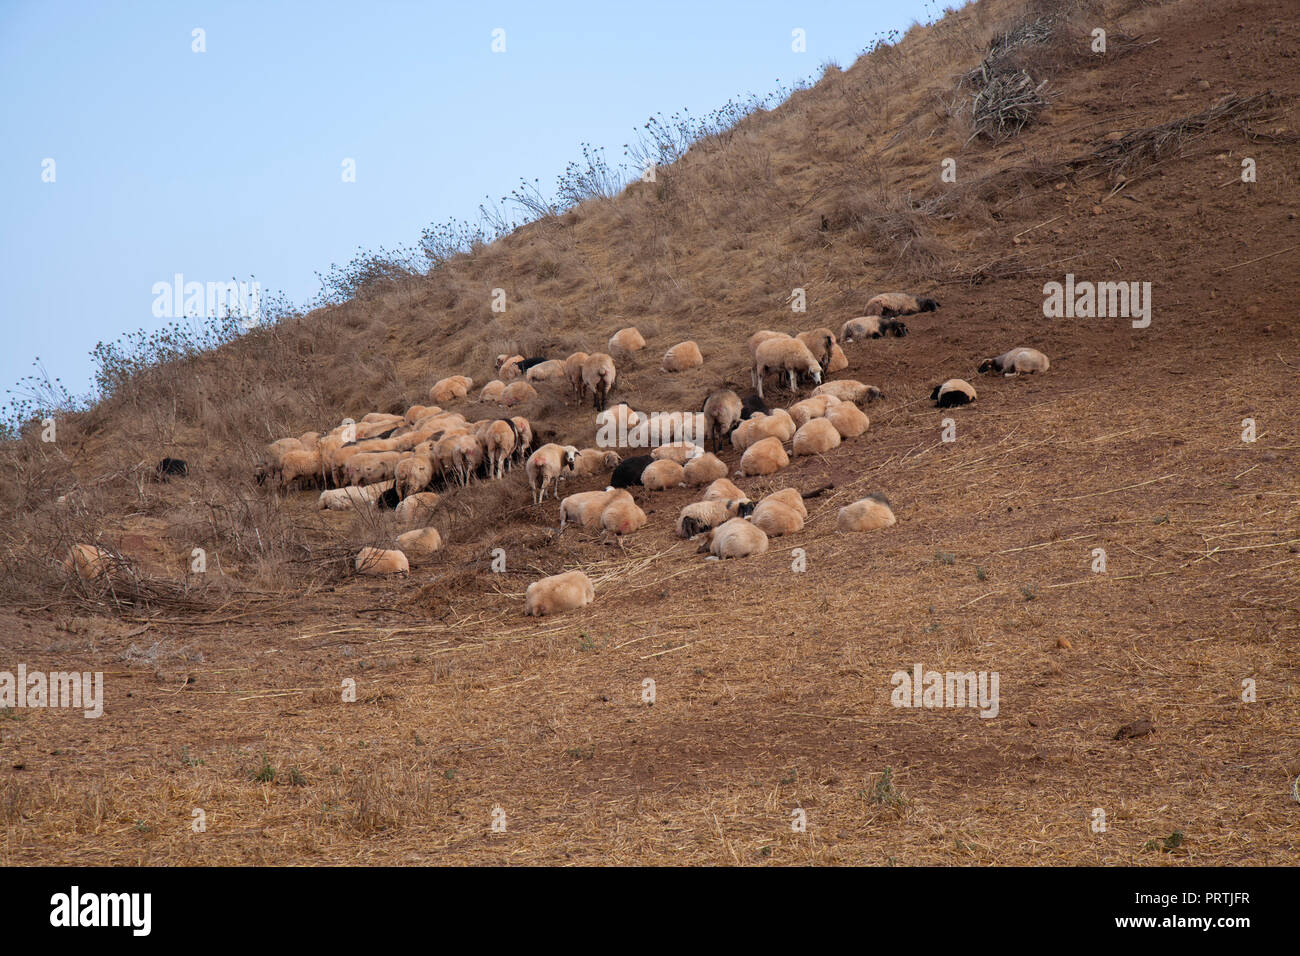 Gran Canaria, September, plants are yellow and dry, flock of sheep resting on hill slope Stock Photo